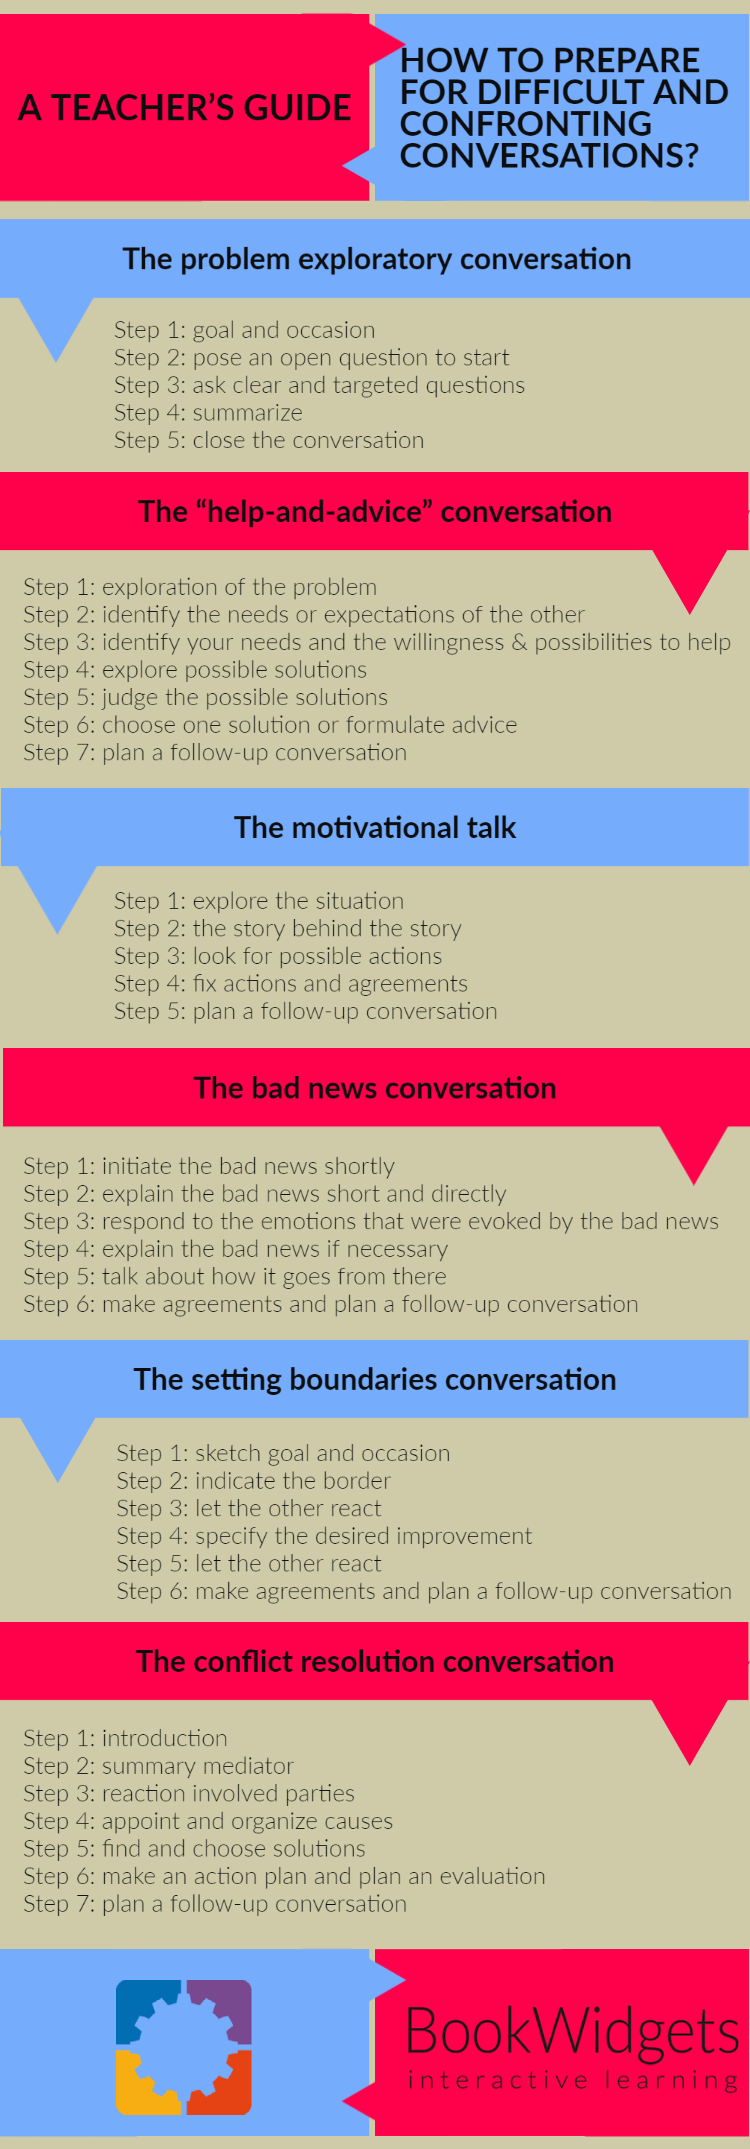 Prepare for difficult and confronting conversations